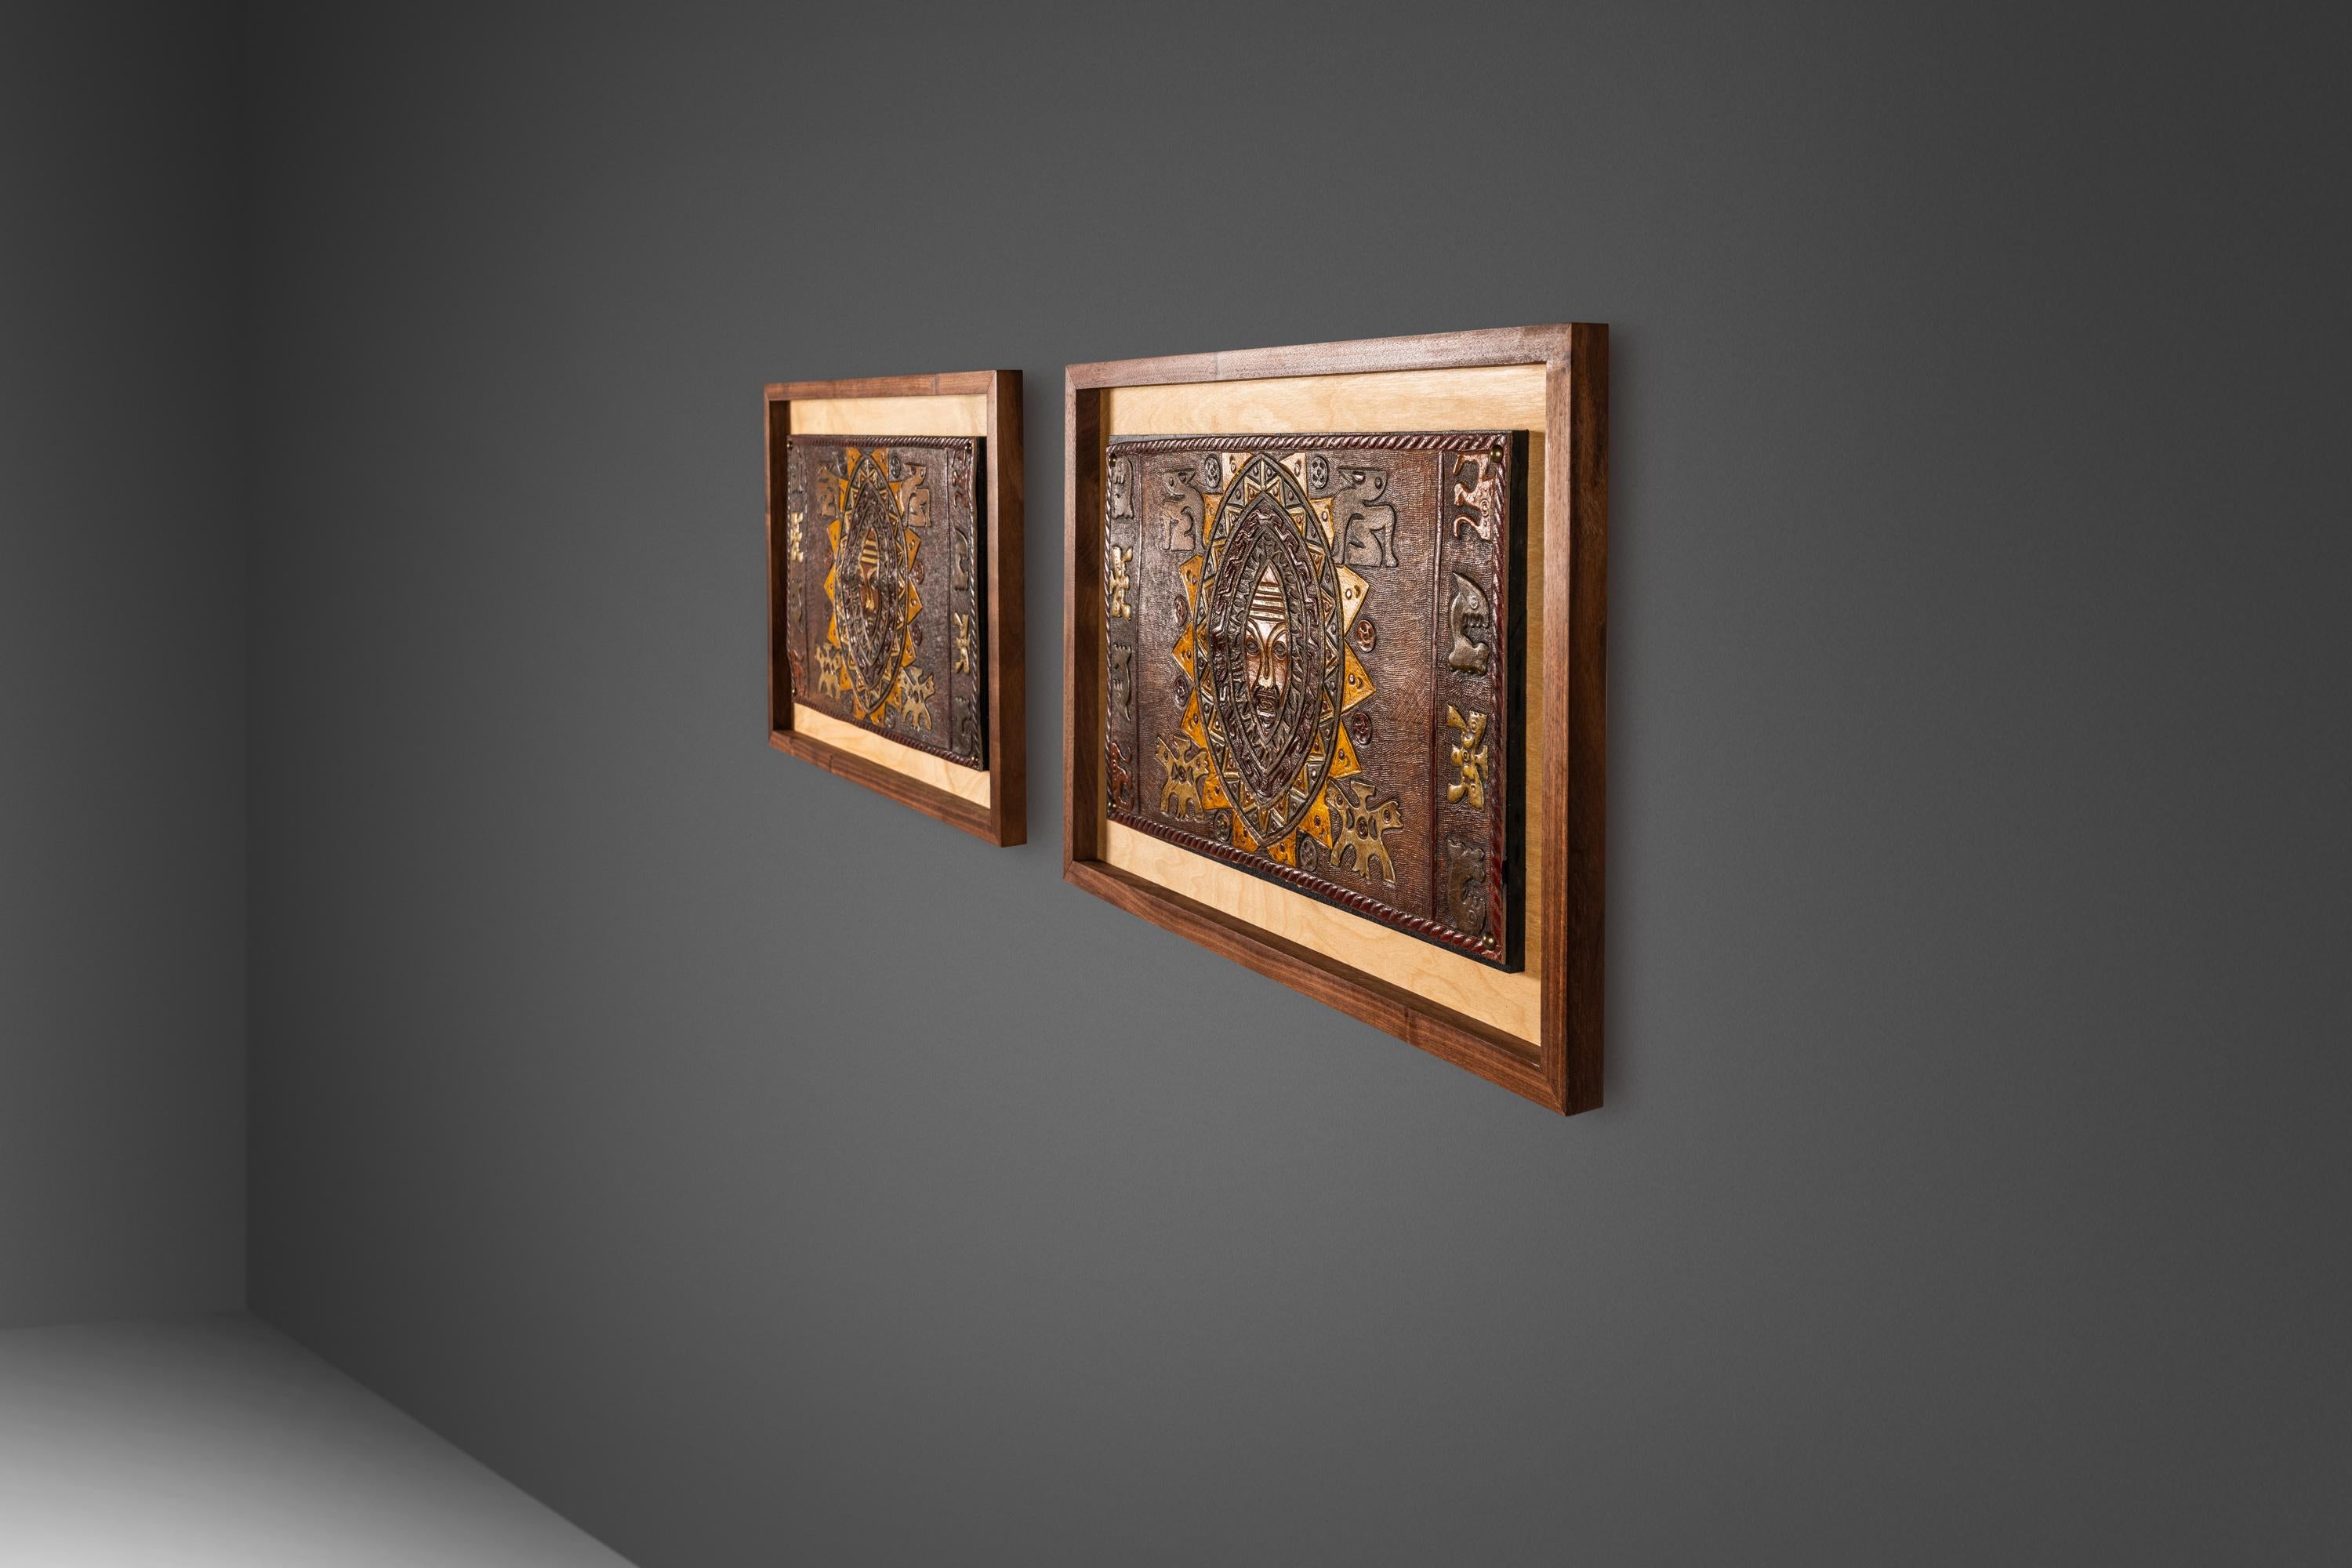 Set of 2 Embossed Leather Pre-Columbian Art by Angel Pazmino, Ecuador, c. 1960s For Sale 8